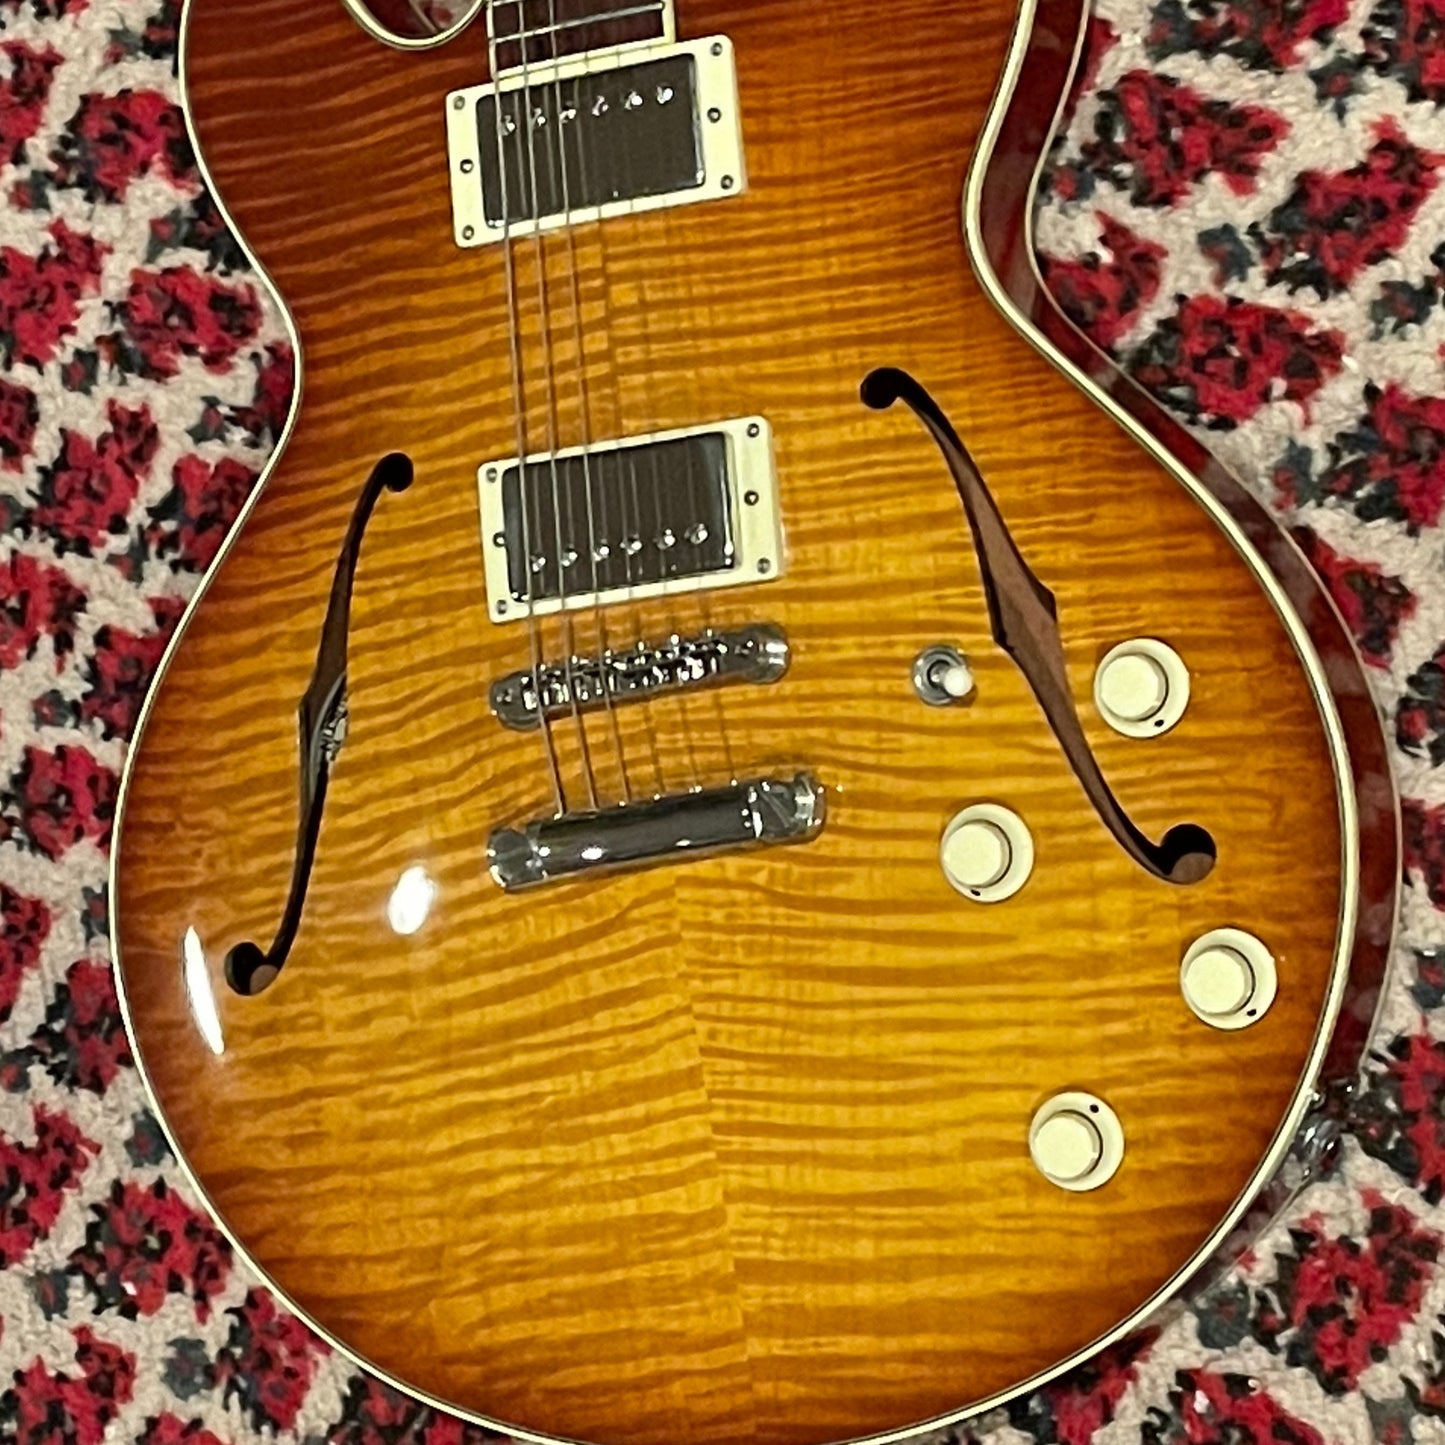 2007 Collings I-35 Deluxe